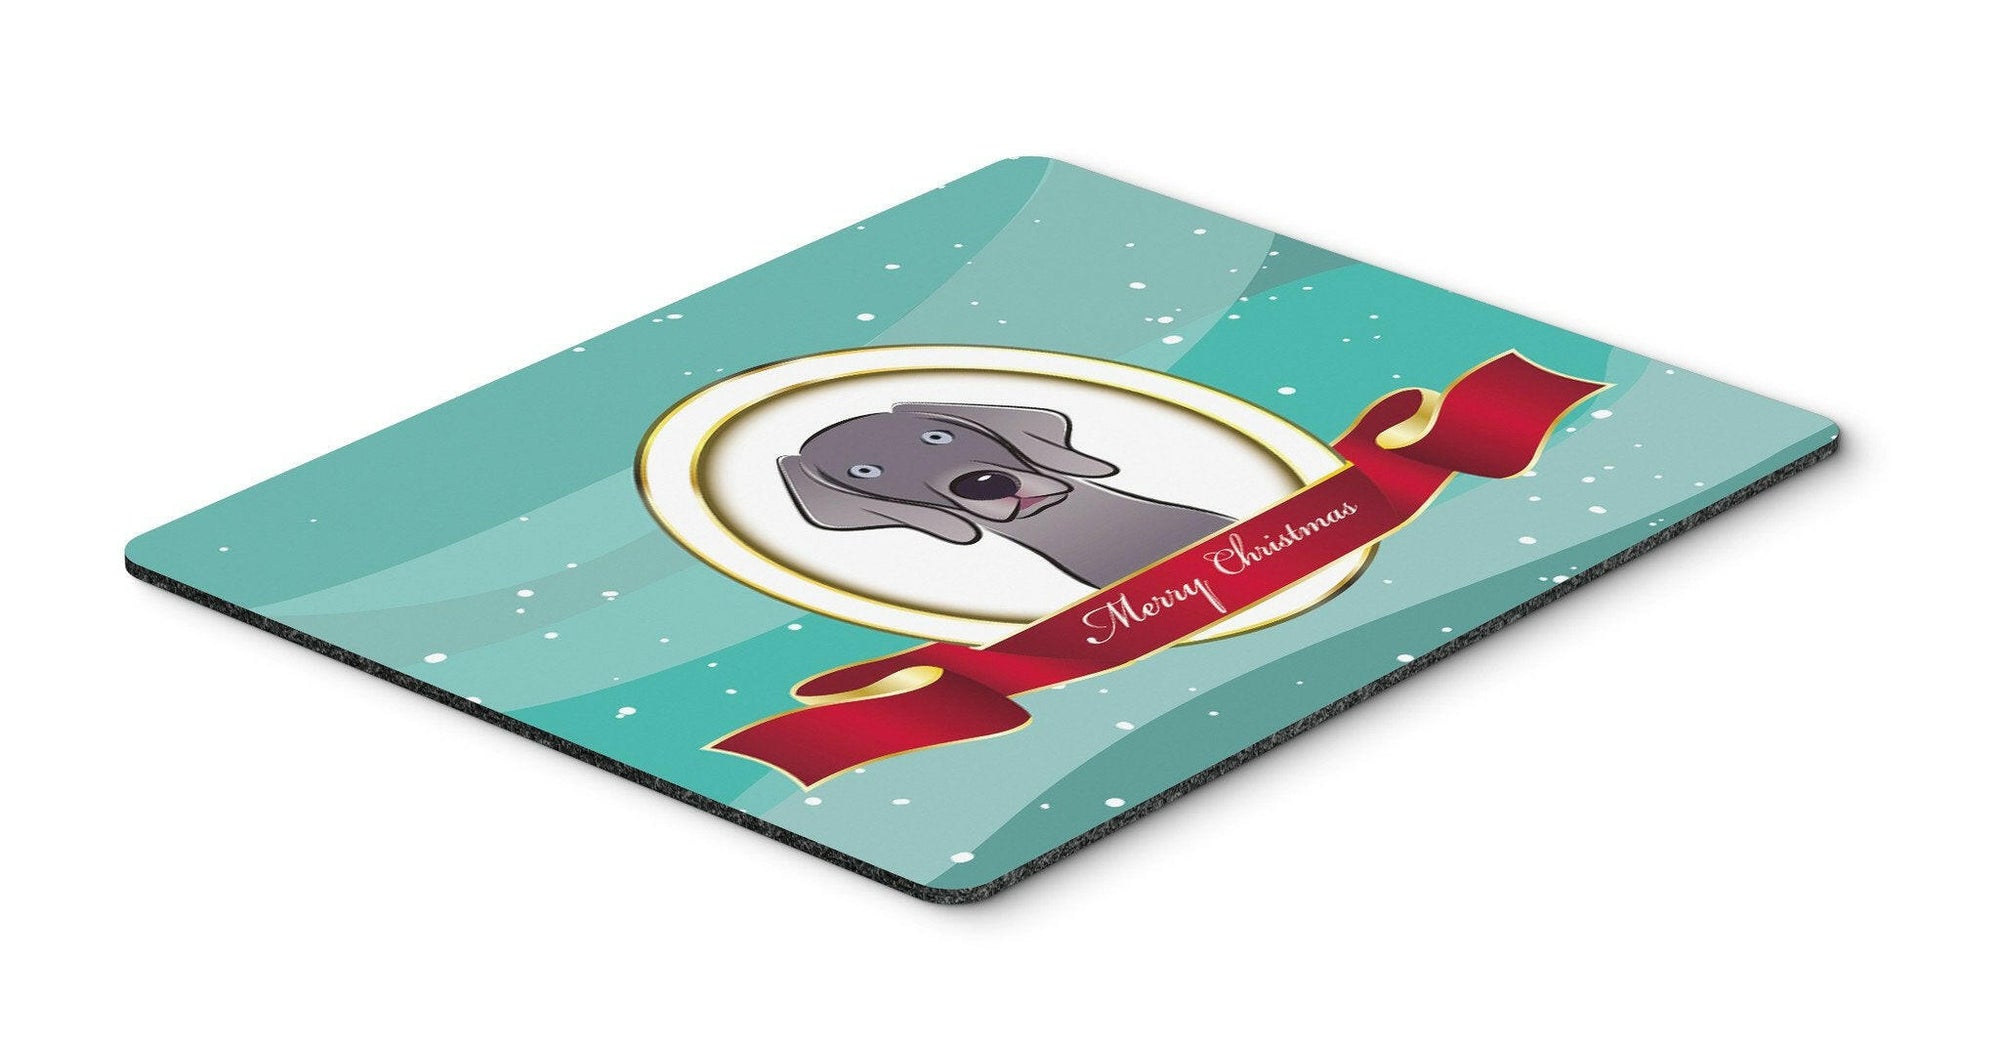 Weimaraner Merry Christmas Mouse Pad, Hot Pad or Trivet BB1541MP by Caroline's Treasures